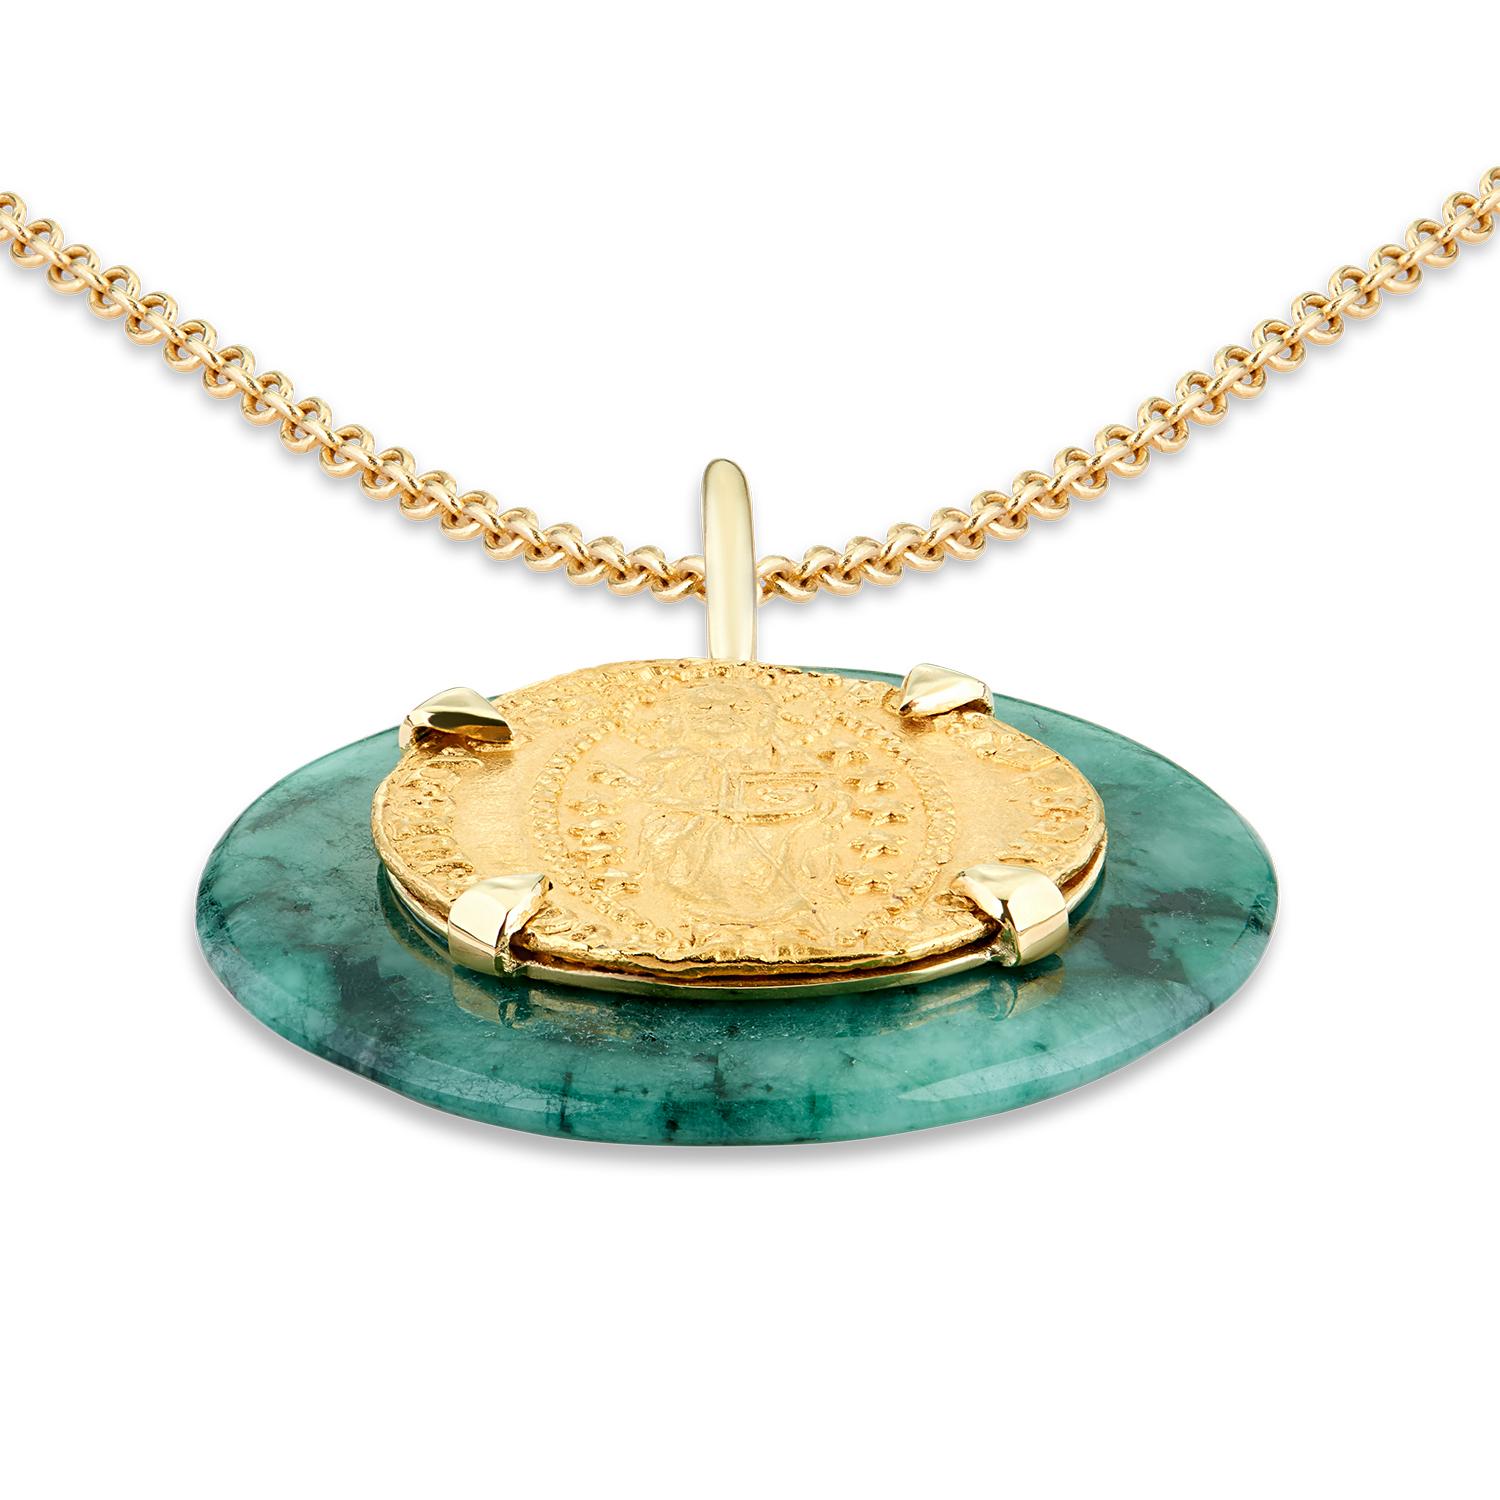 This DUBINI coin necklace from the 'Empires' collection features an authentic Venetian gold ducat coin (LXII Doge 1382-1400) set in 18K yellow gold with emerald quartz disc.

Disc diameter  3cm
Chain Length  75cm - also available in shorter 47cm on